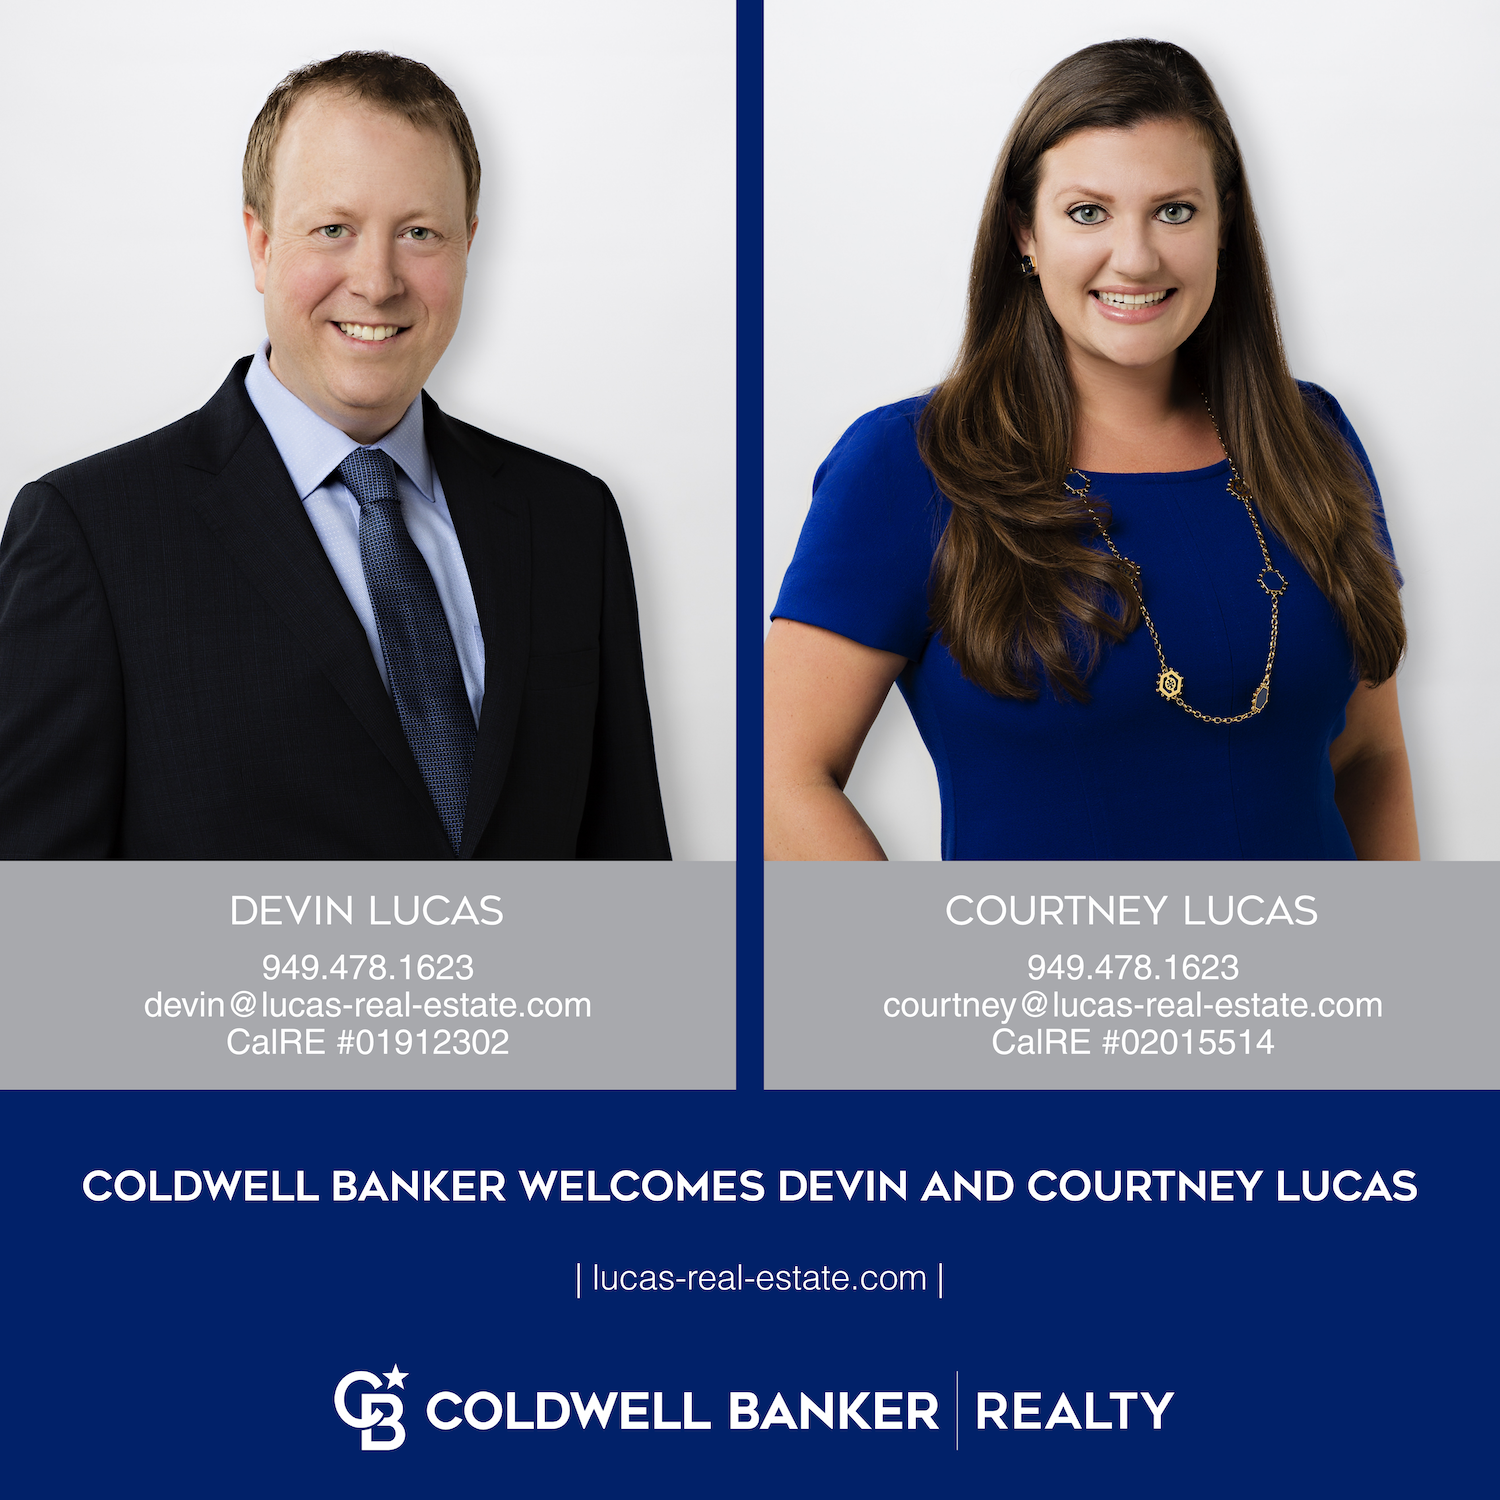 photo of Devin Lucas and Courtney Lucas with Coldwell Banker introduction